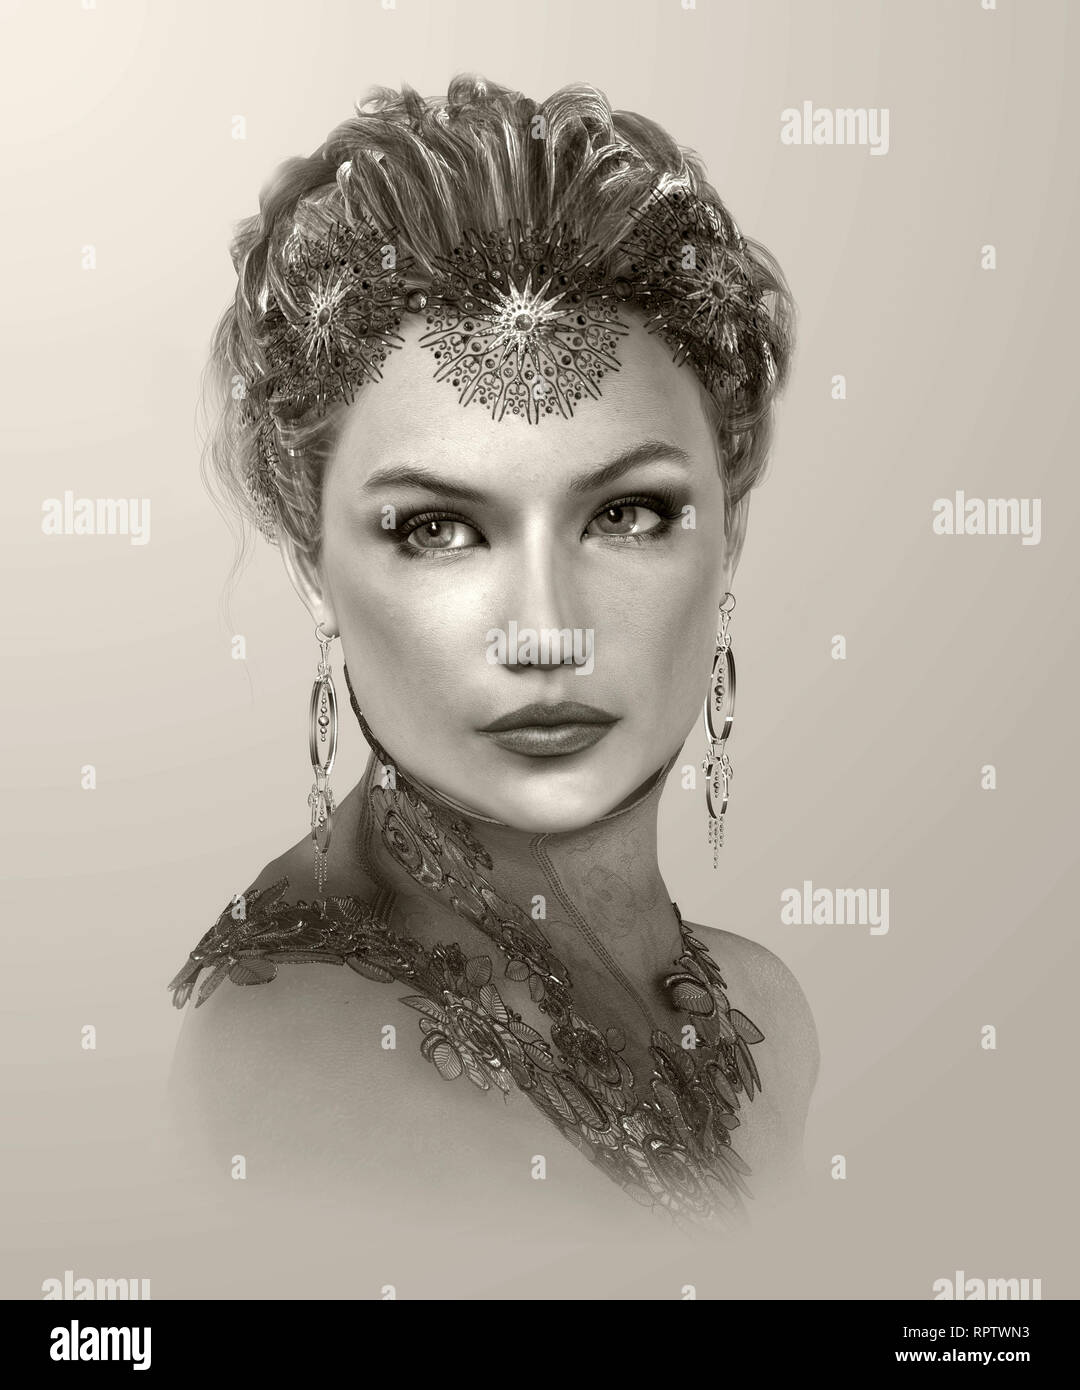 3D computer graphics of a Portrait of a Lady with hair accessories, collar and earrings Stock Photo